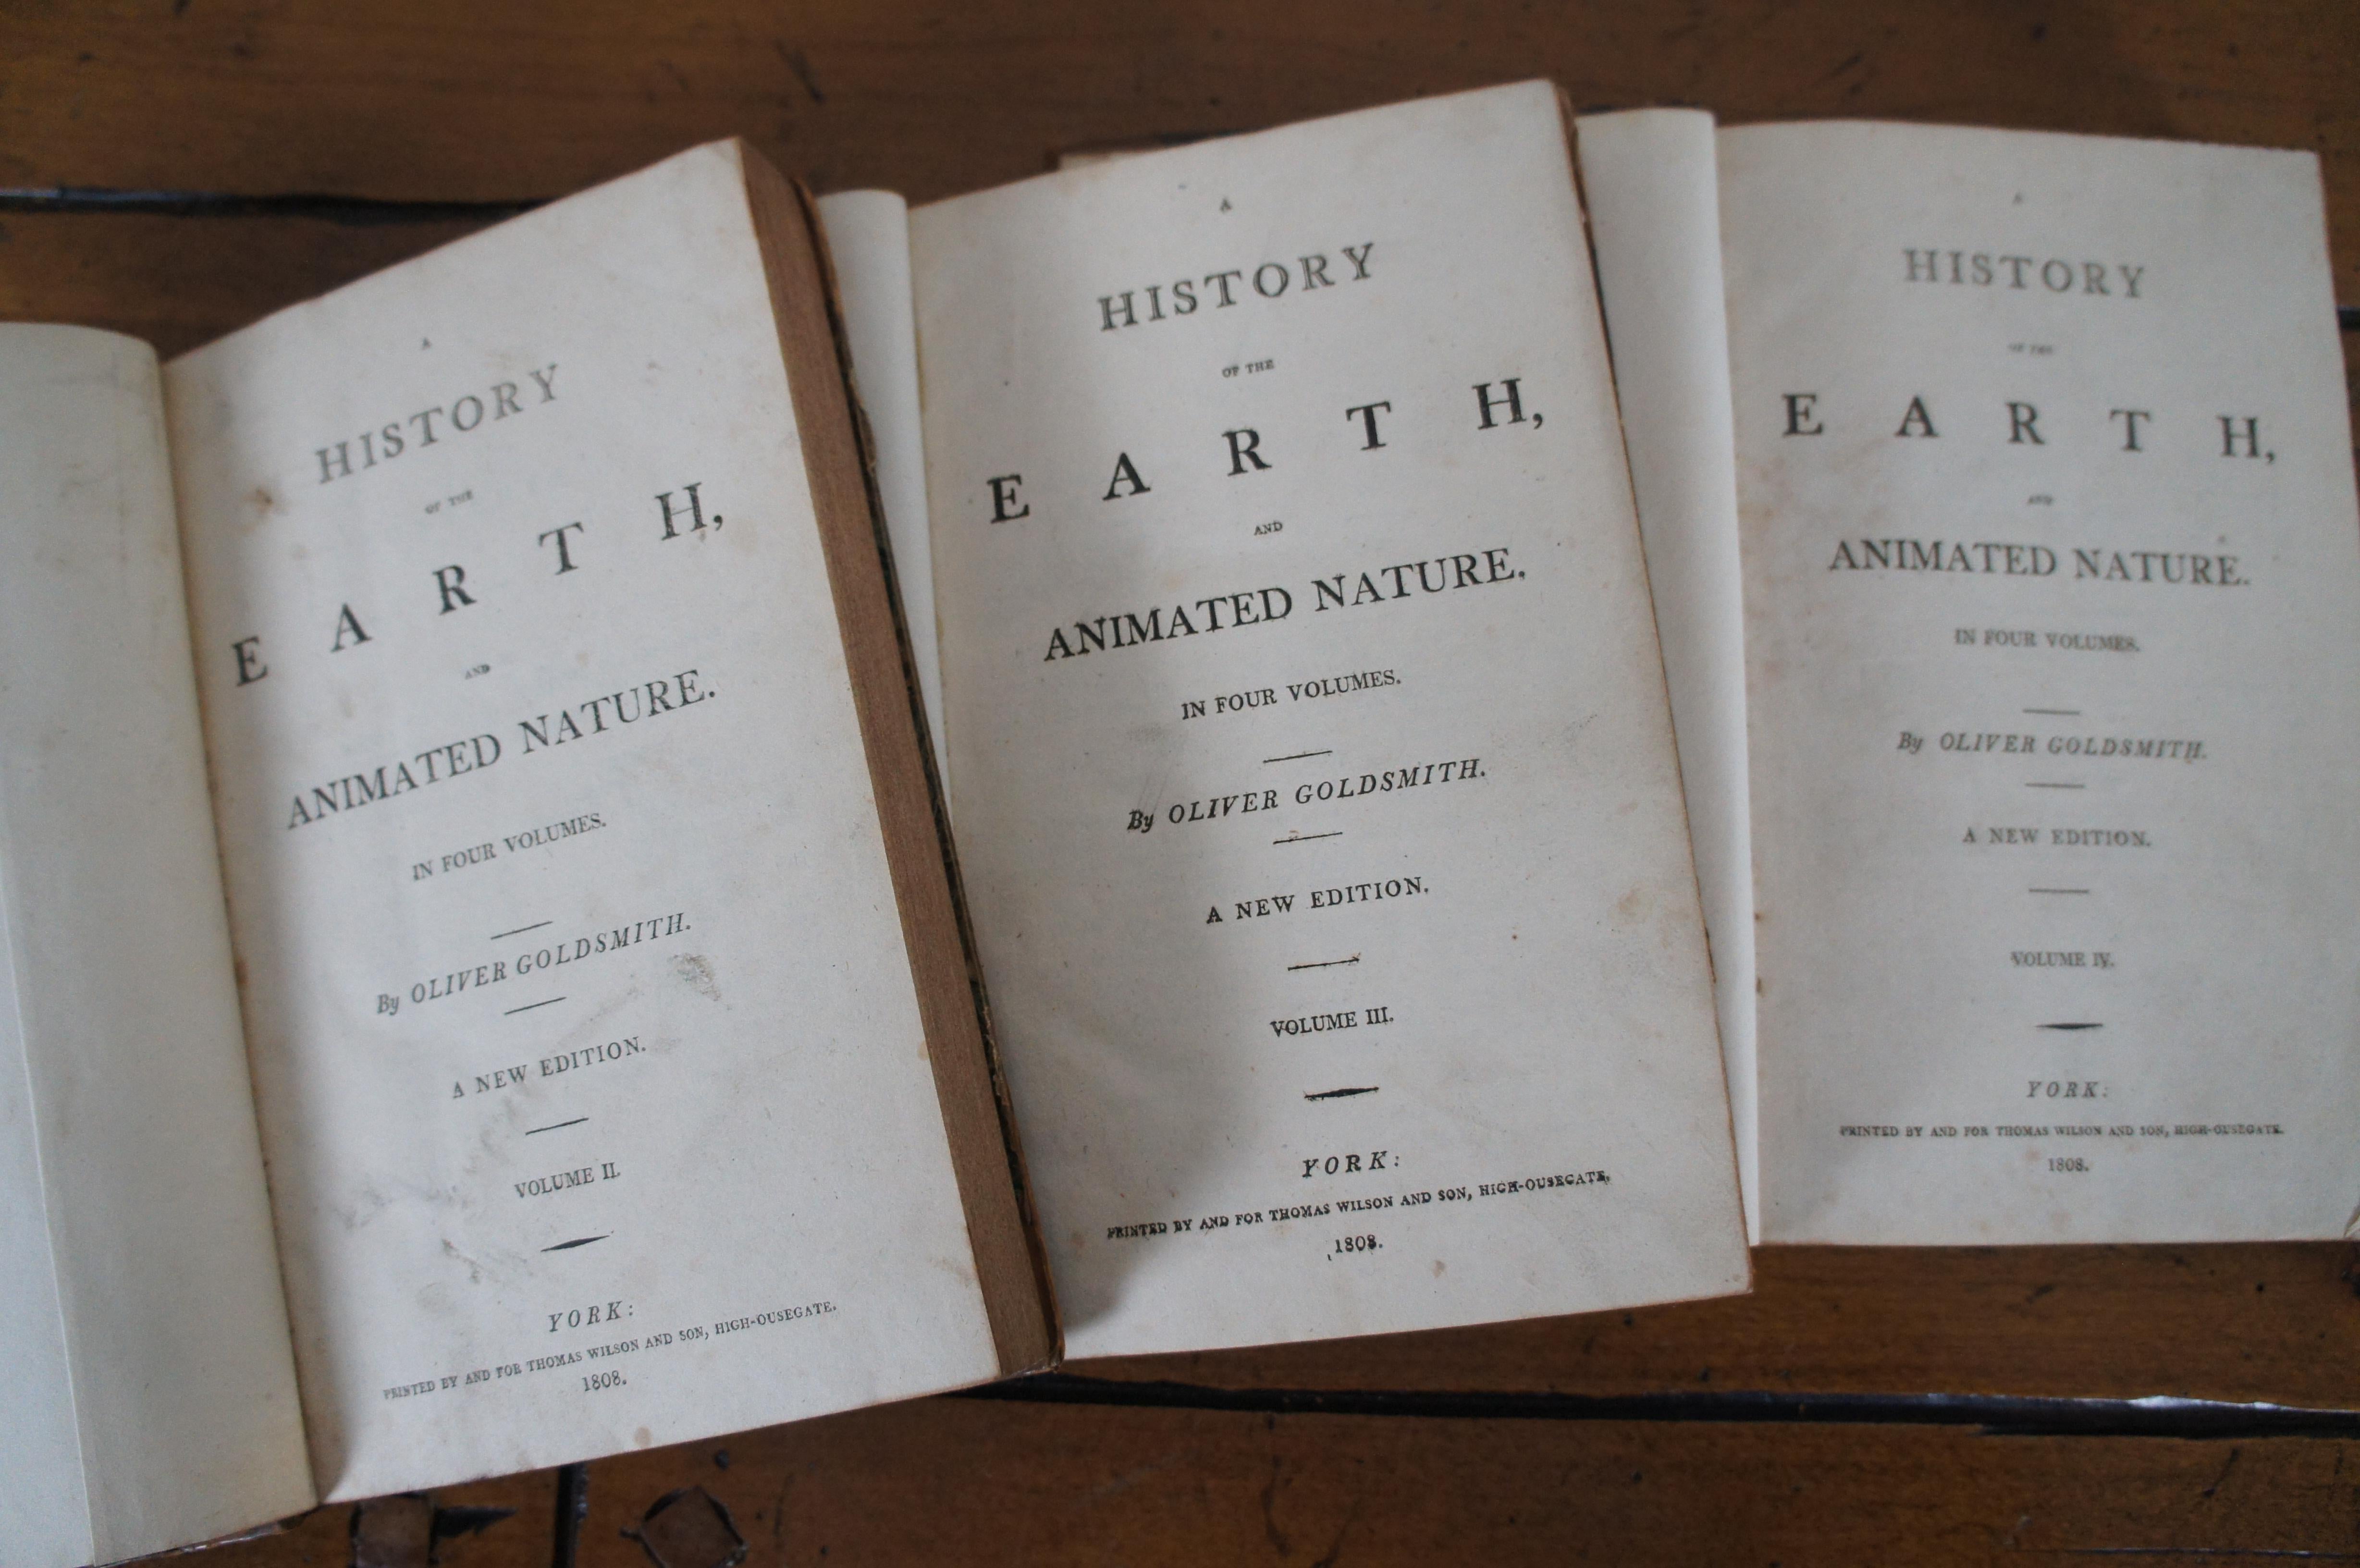 4 Livres anciens Goldsmiths History of Earth Animated Nature Leather Vol I-IV, 1808 en vente 2